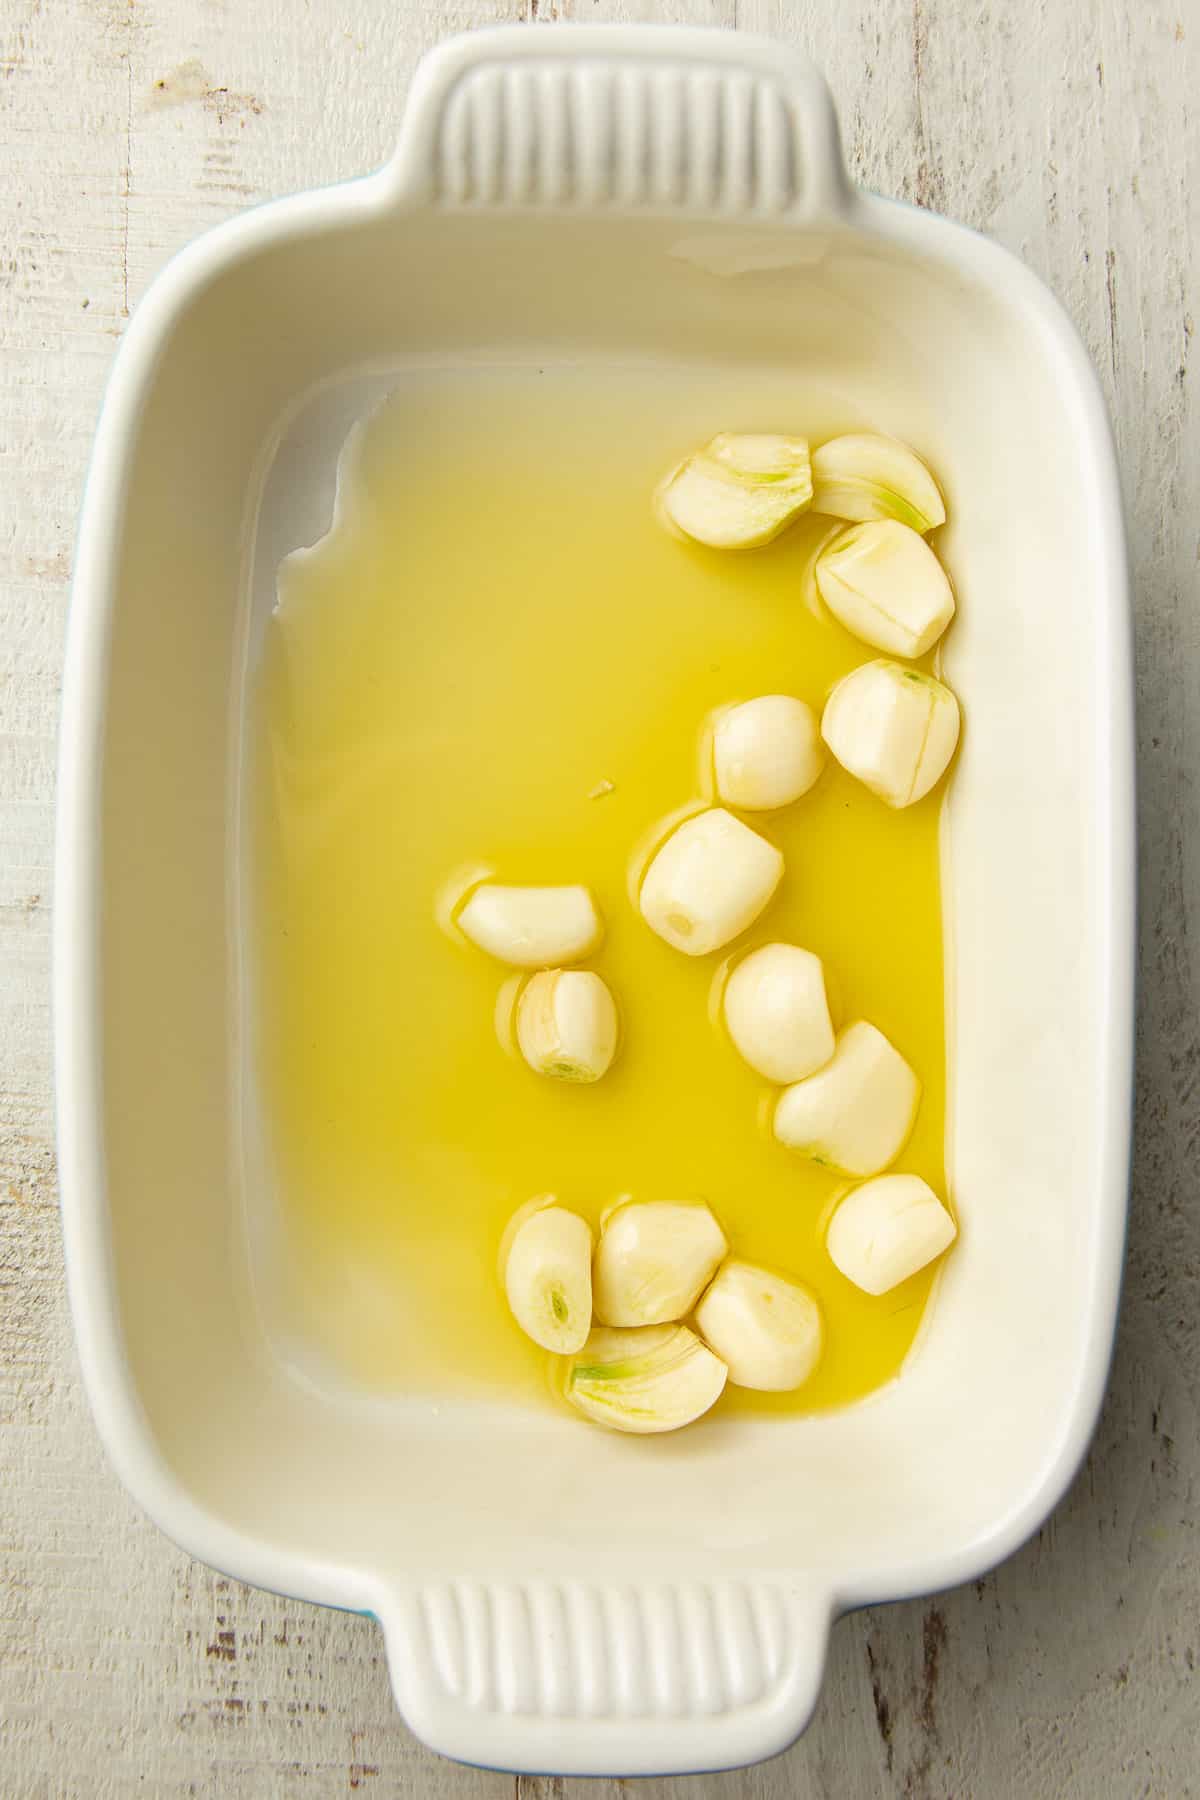 Raw garlic cloves and olive oil in a baking dish.